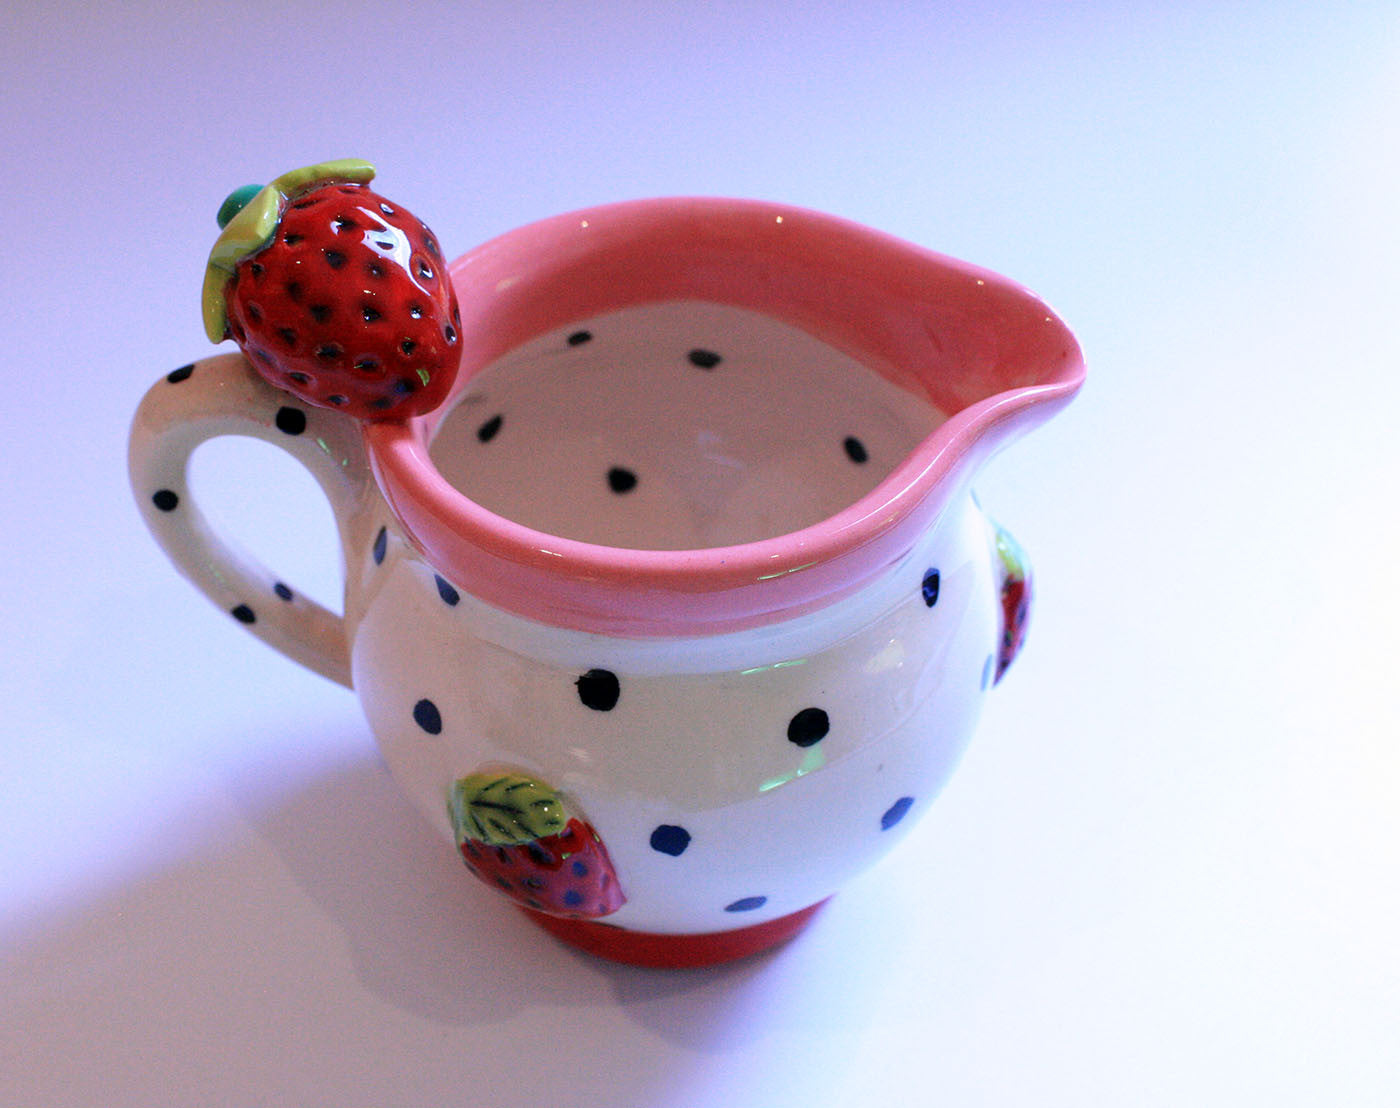 Small Barrel Jug with Strawberries - MaryRoseYoung